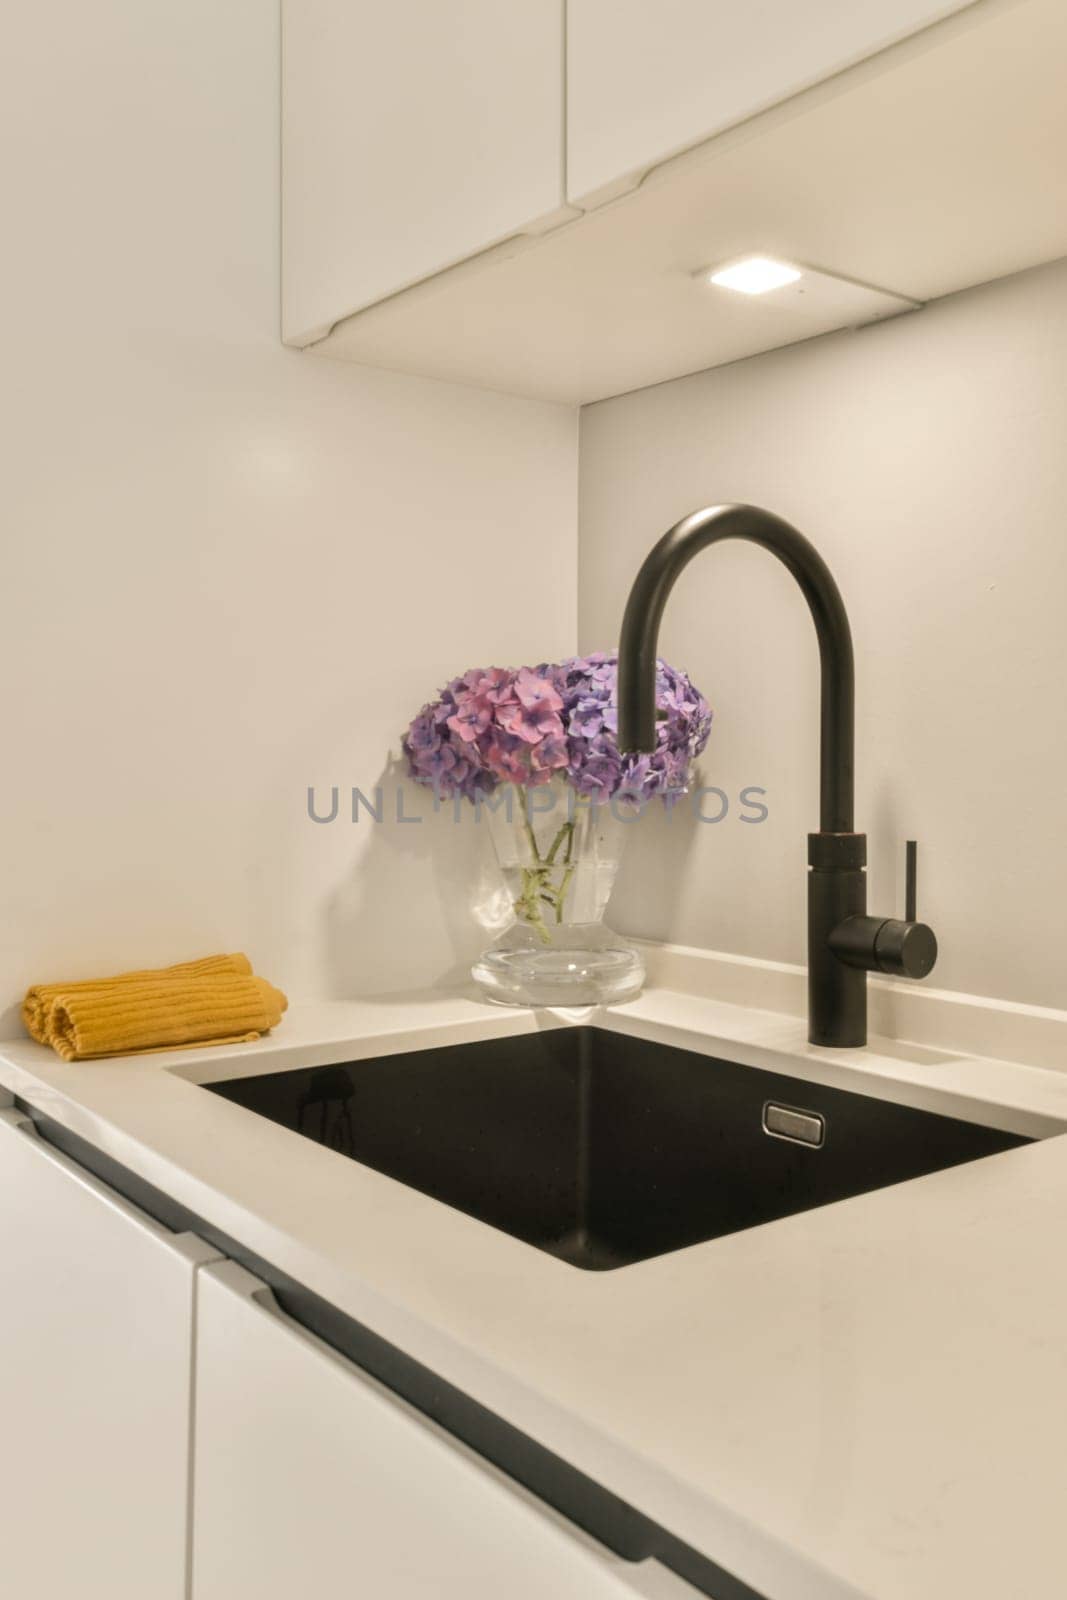 a kitchen sink with flowers in a glass vase on the countertop and black fauced fae over it